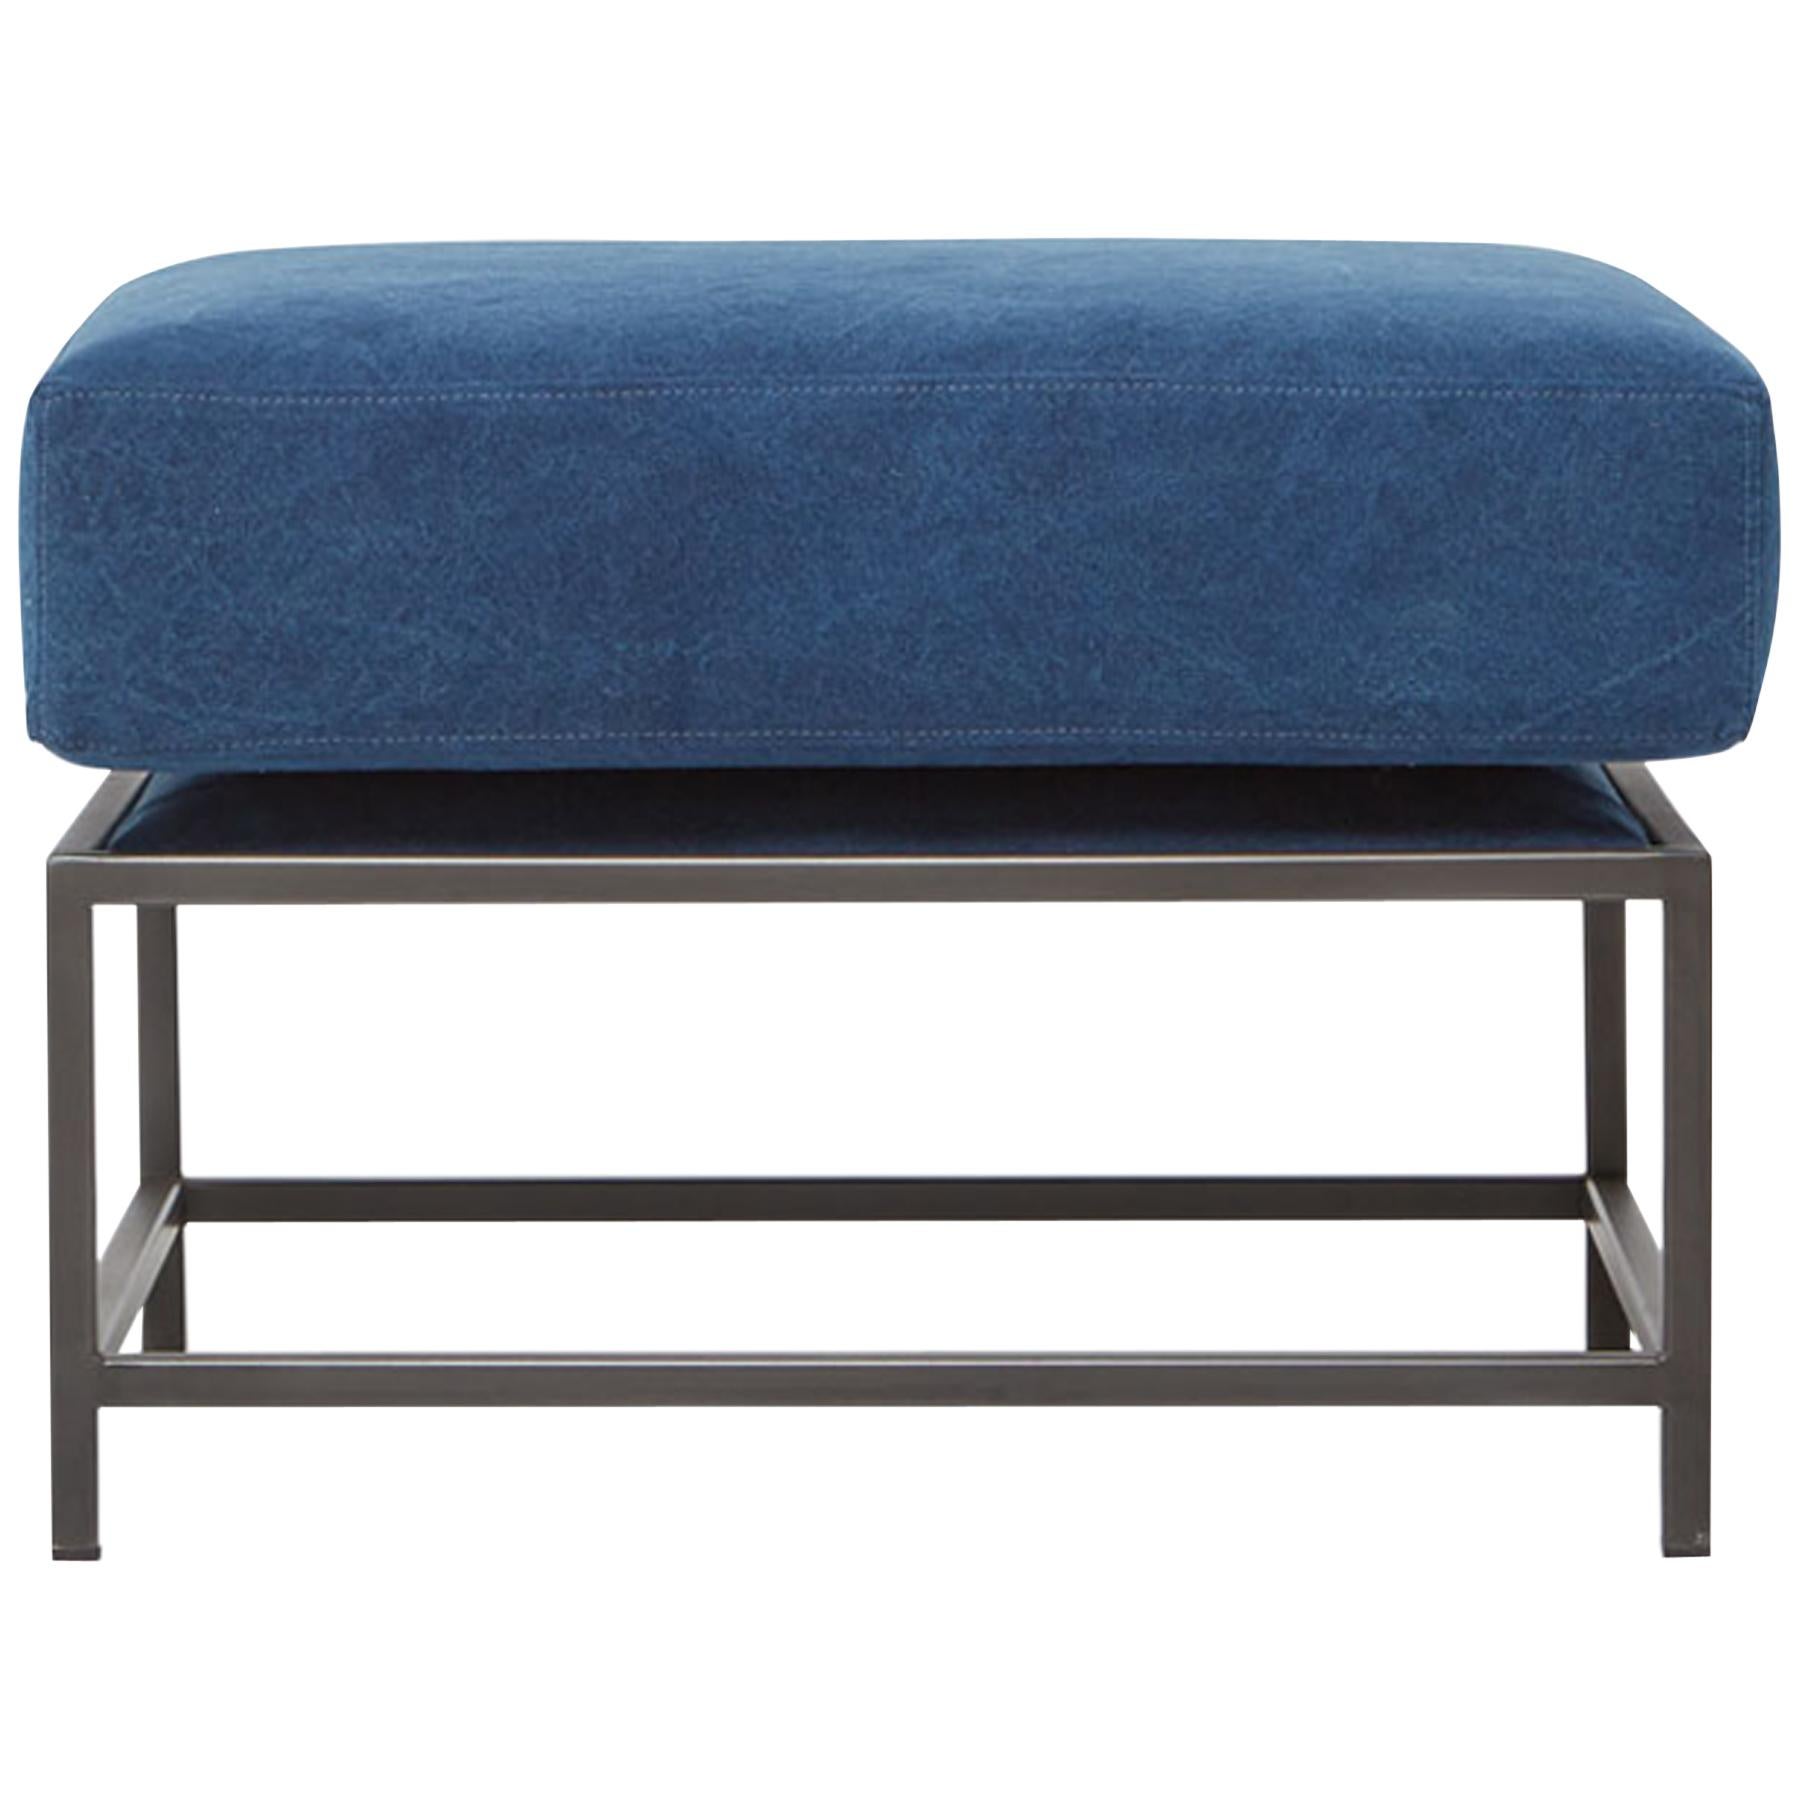 Hand-Dyed Indigo Canvas and Blackened Steel Ottoman For Sale